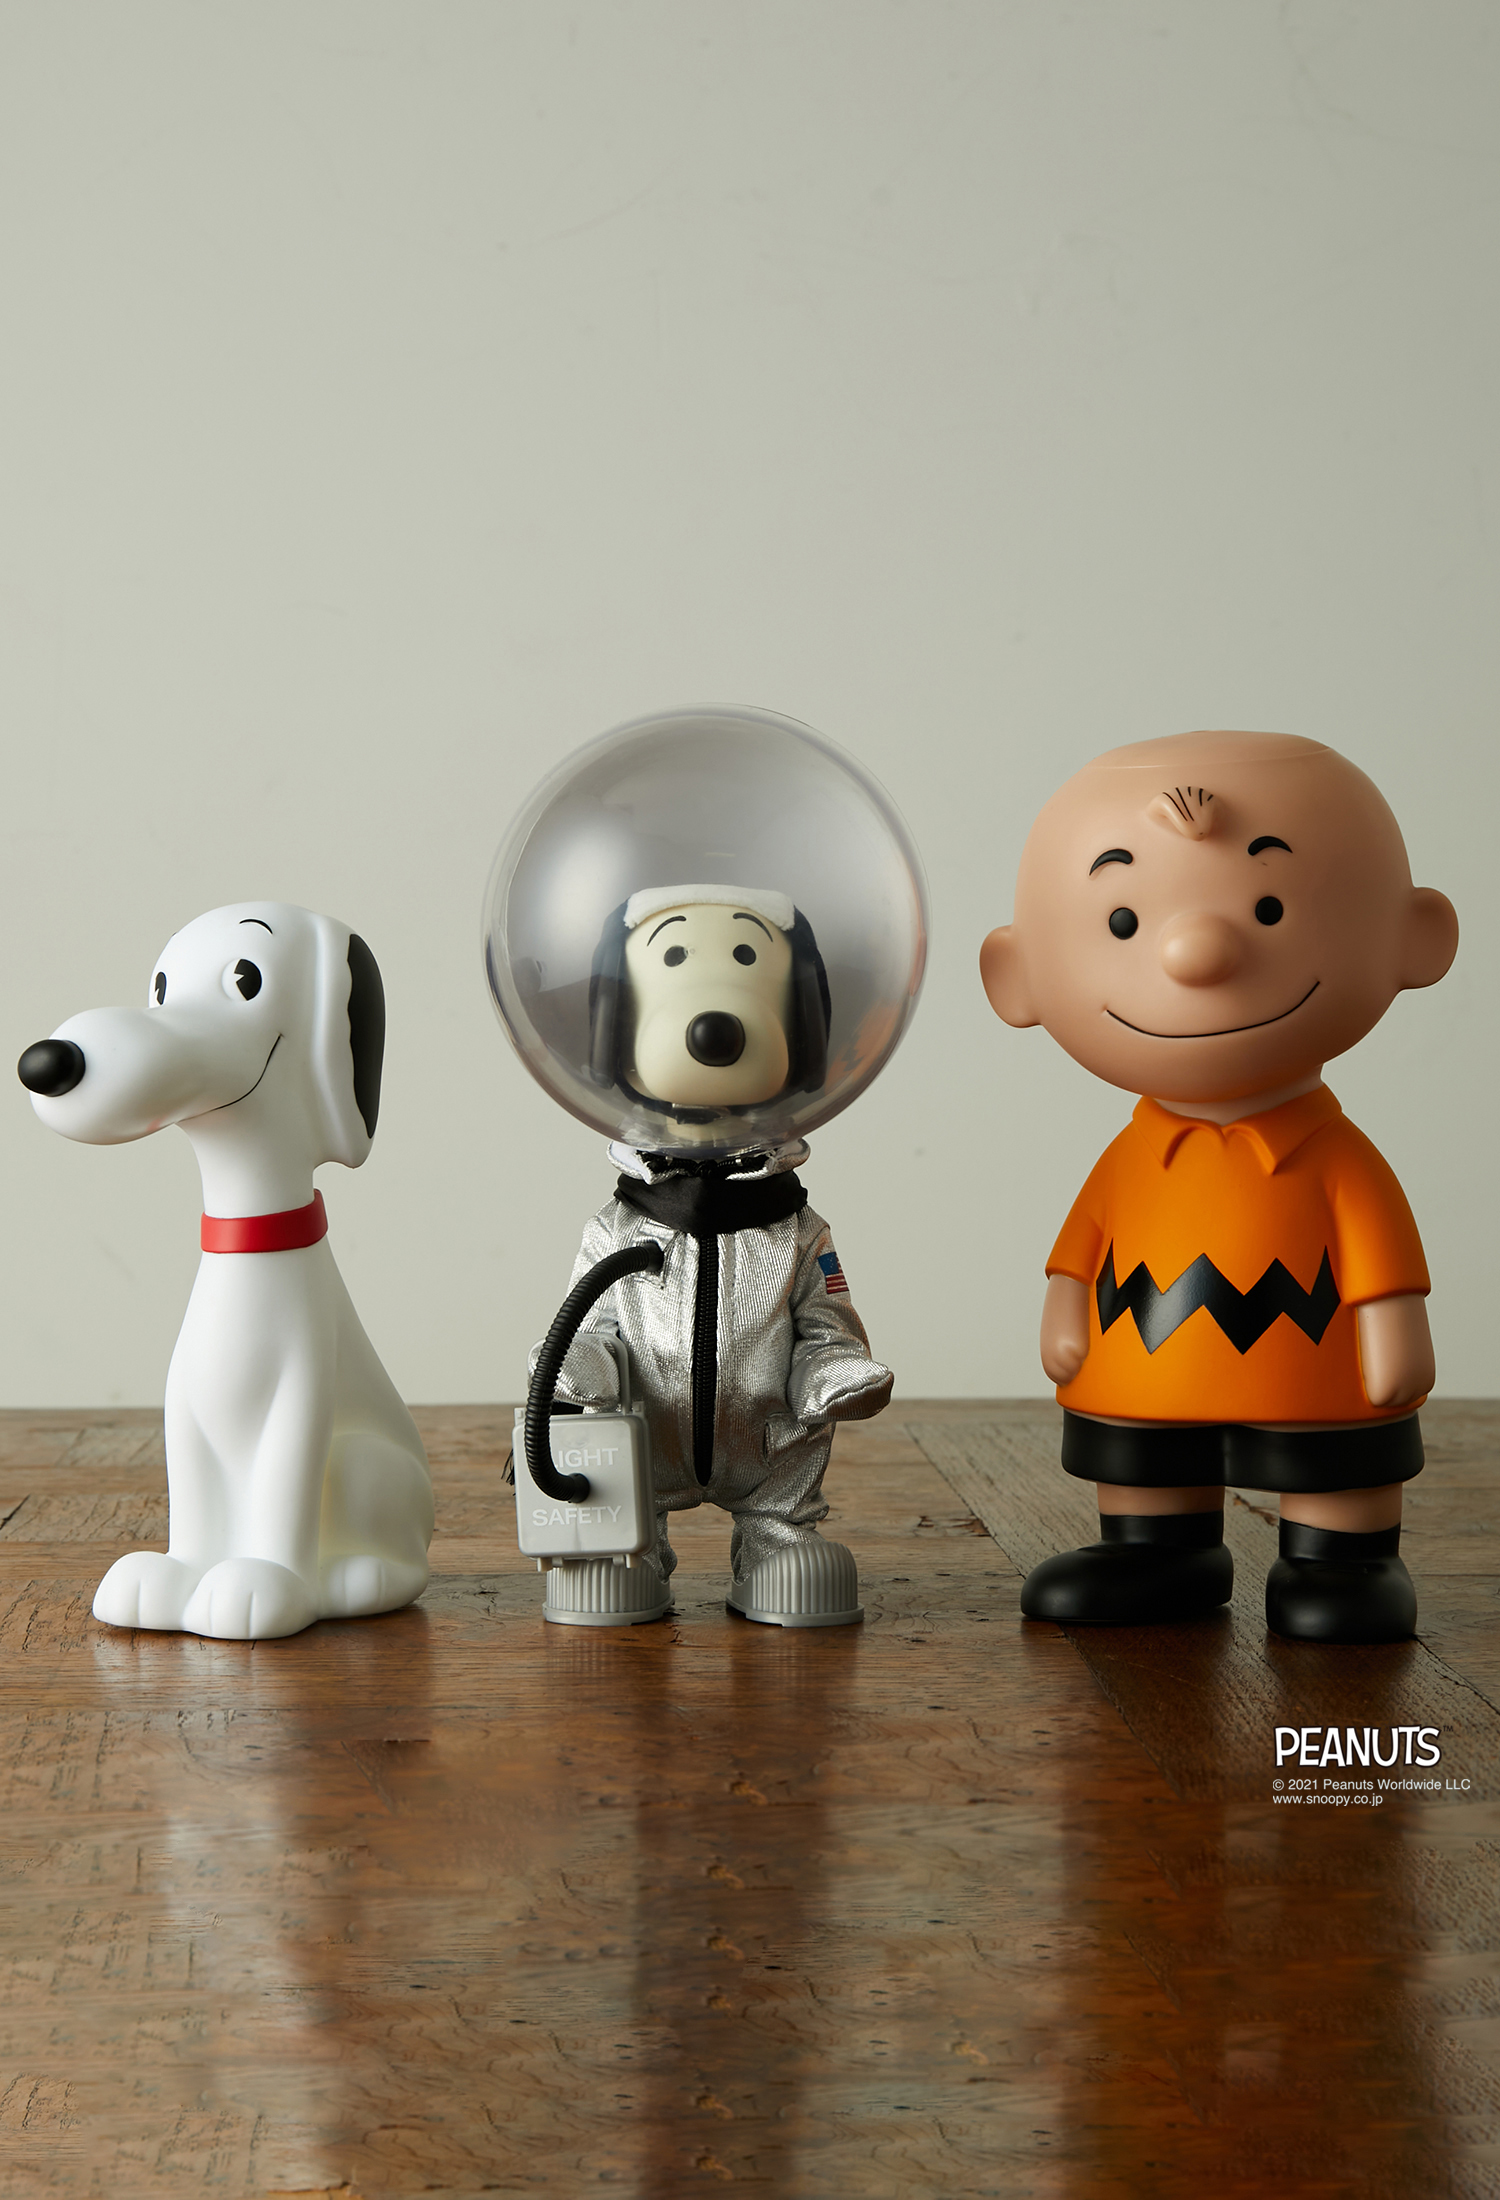 VCD SNOOPY ASTRONAUT VINTAGE SILVER Ver.